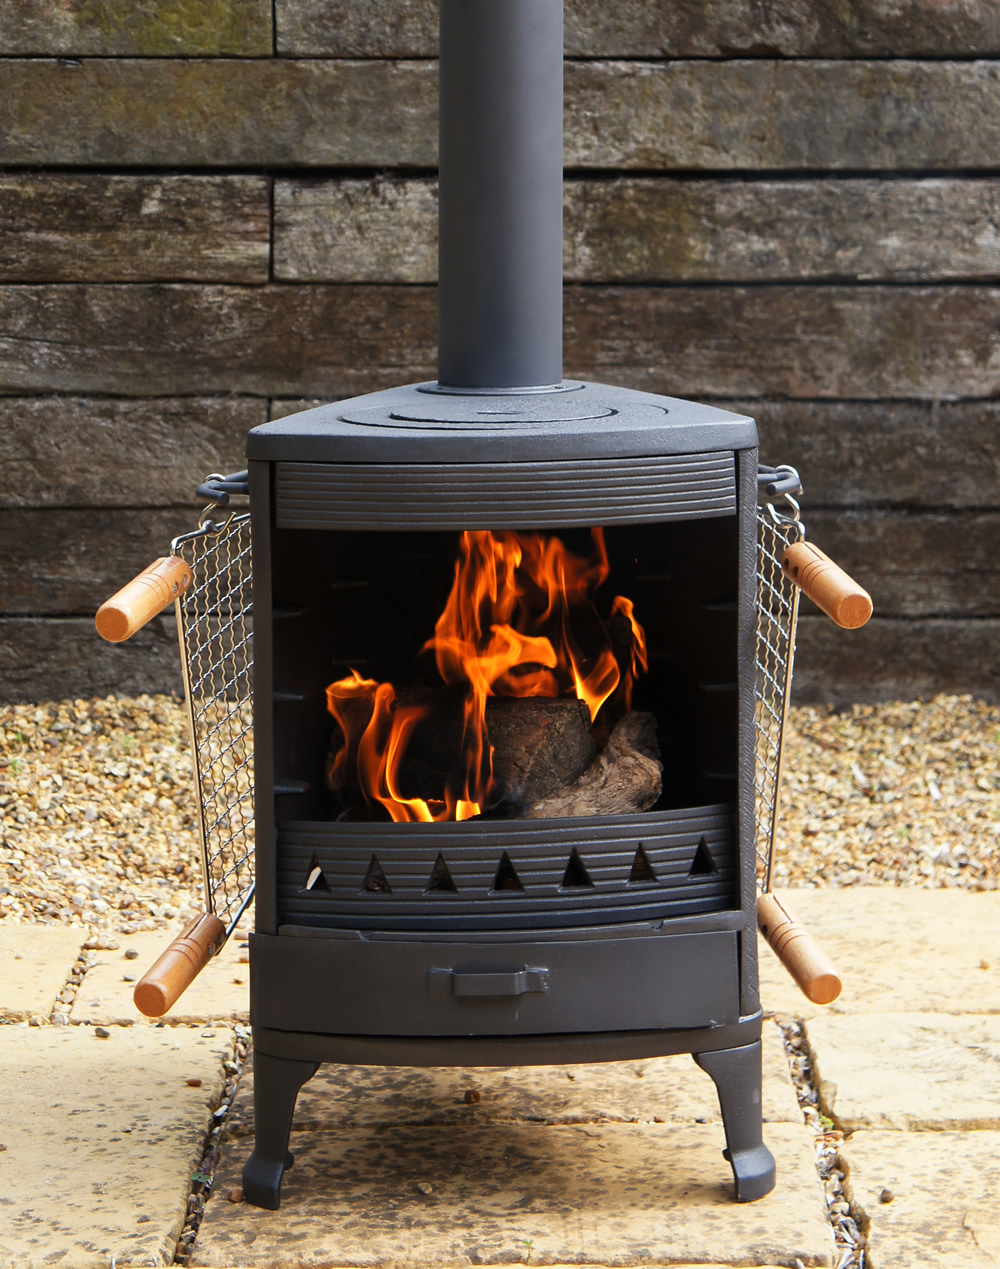 Cast Iron Stove Cooker Bbq Patio Heater, Chiminea Fire Pit Pizza Oven